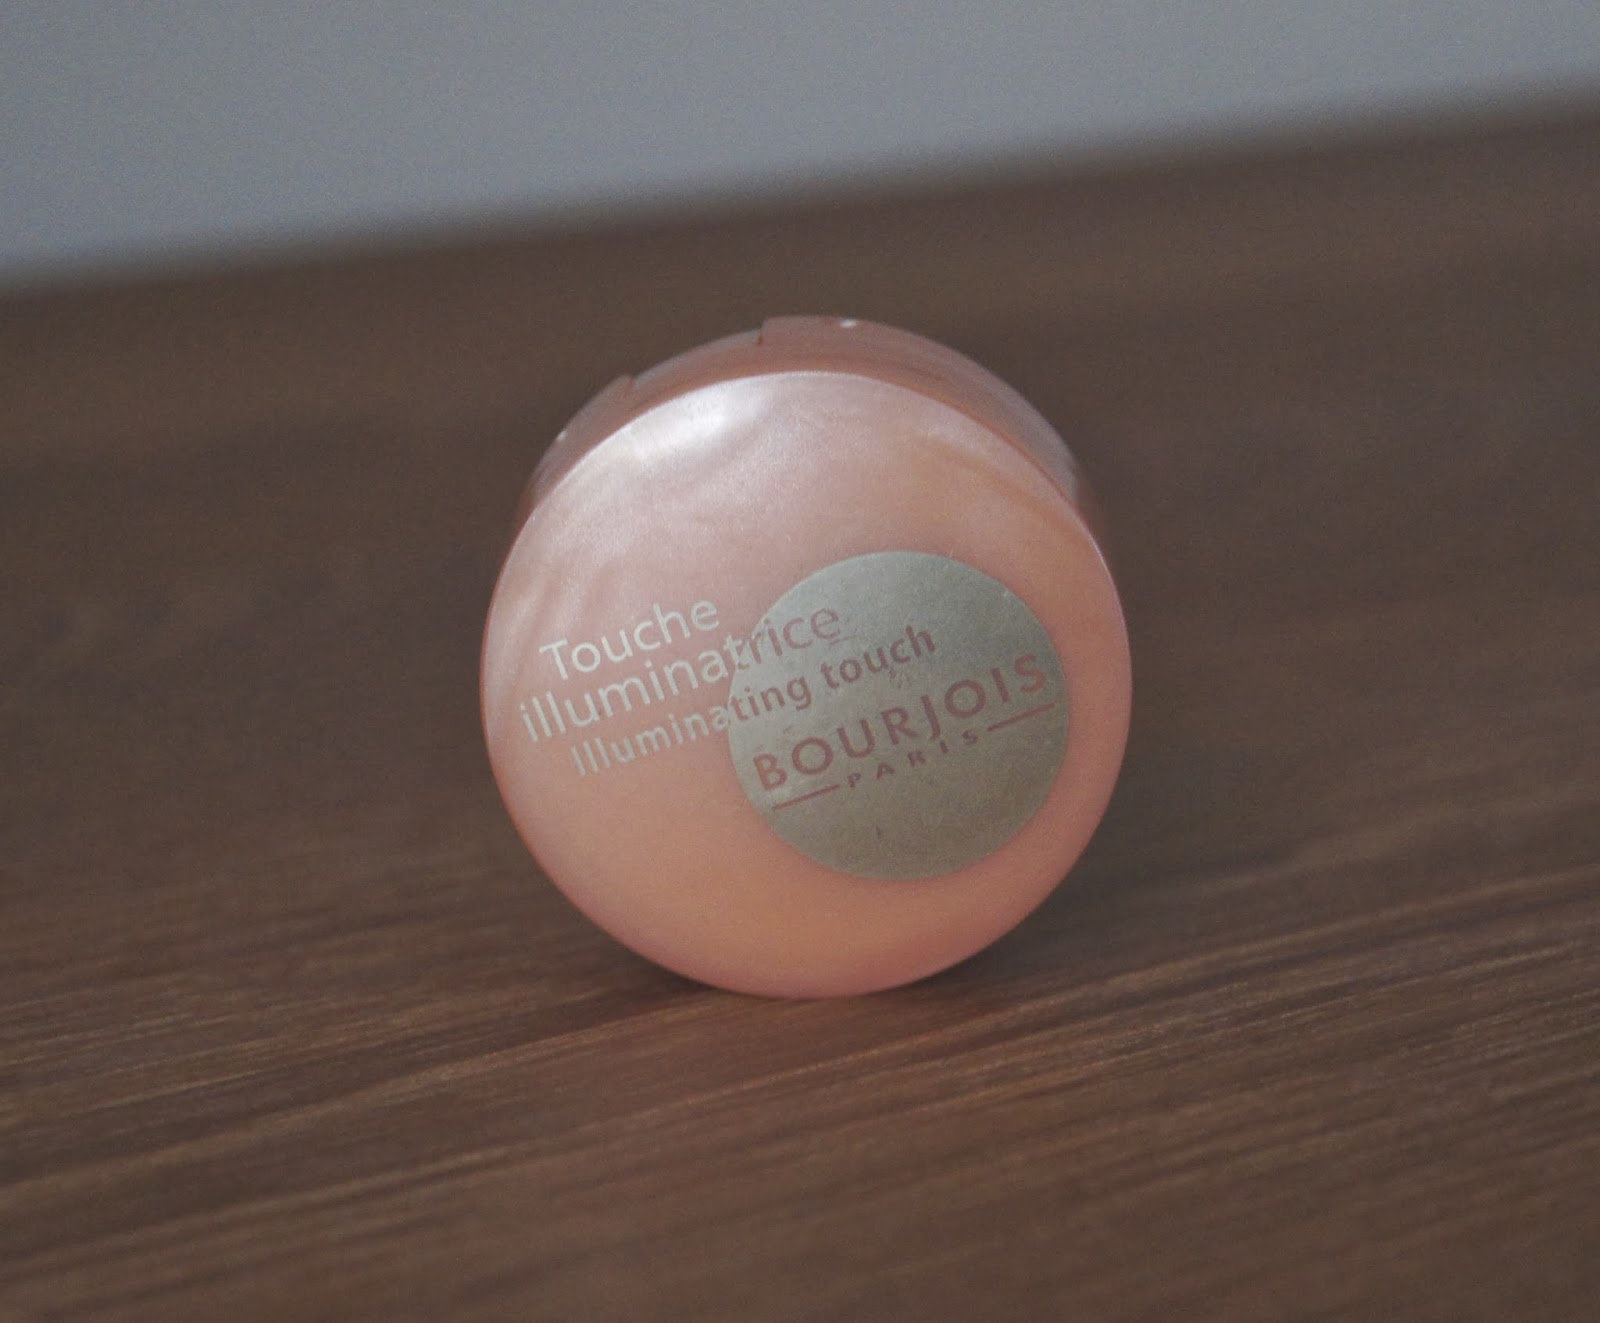 bourjois illuminating touch highlighter review